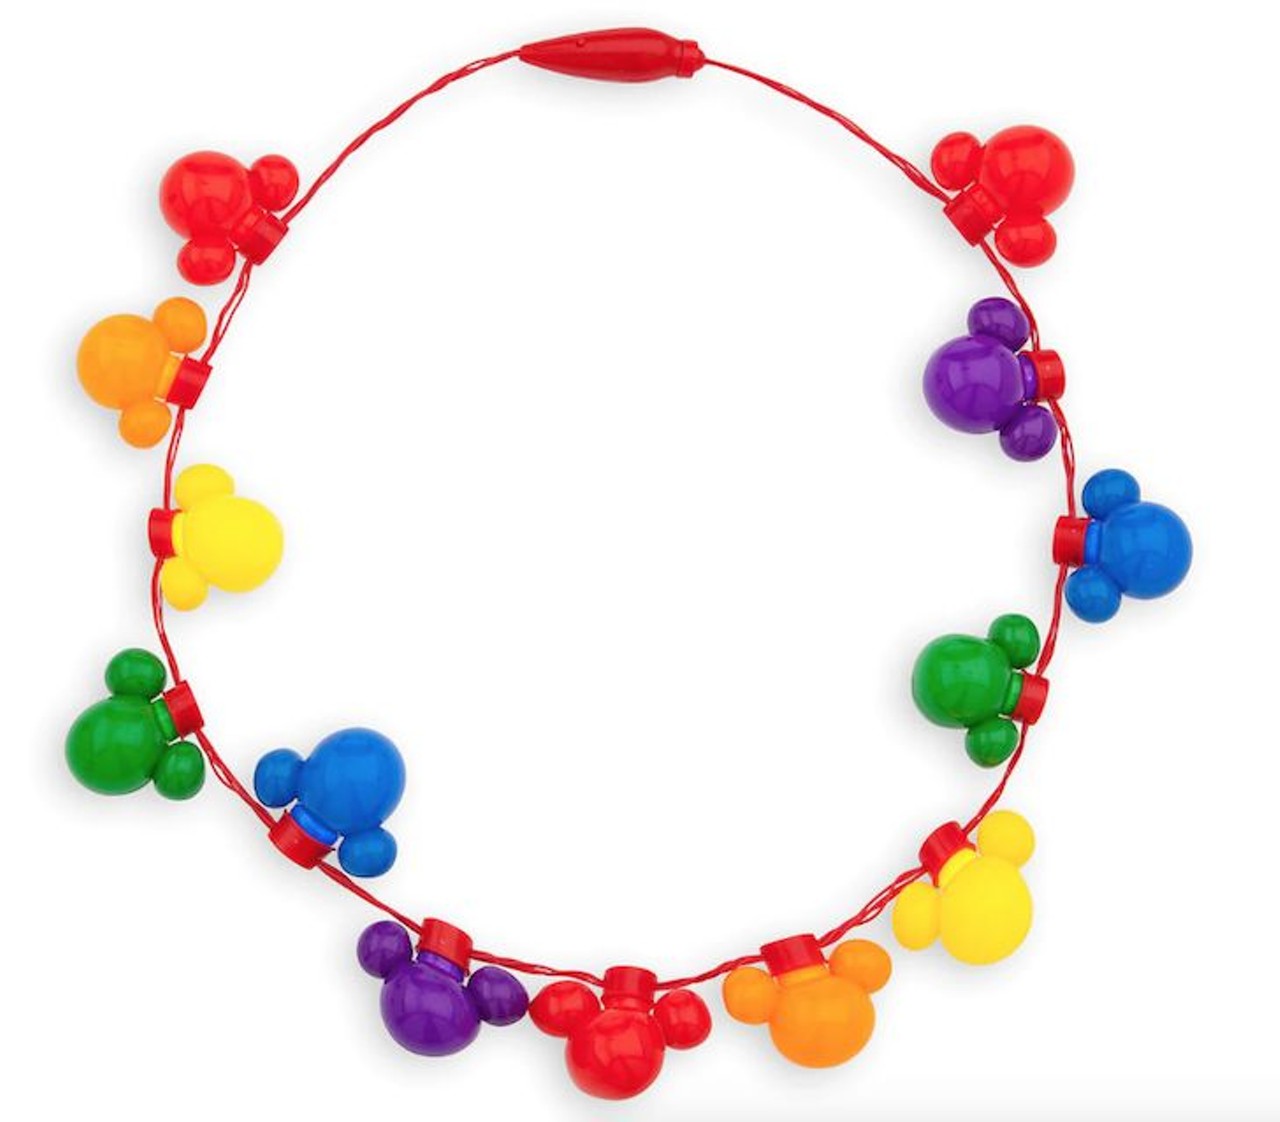 Mickey Mouse Light-Up Necklace
With six different light modes, this rainbow necklace is perhaps one of the coolest items in the Rainbow Disney Collection. With coin cell batteries included, the necklace is priced at $14.99.
Photo via shopDisney